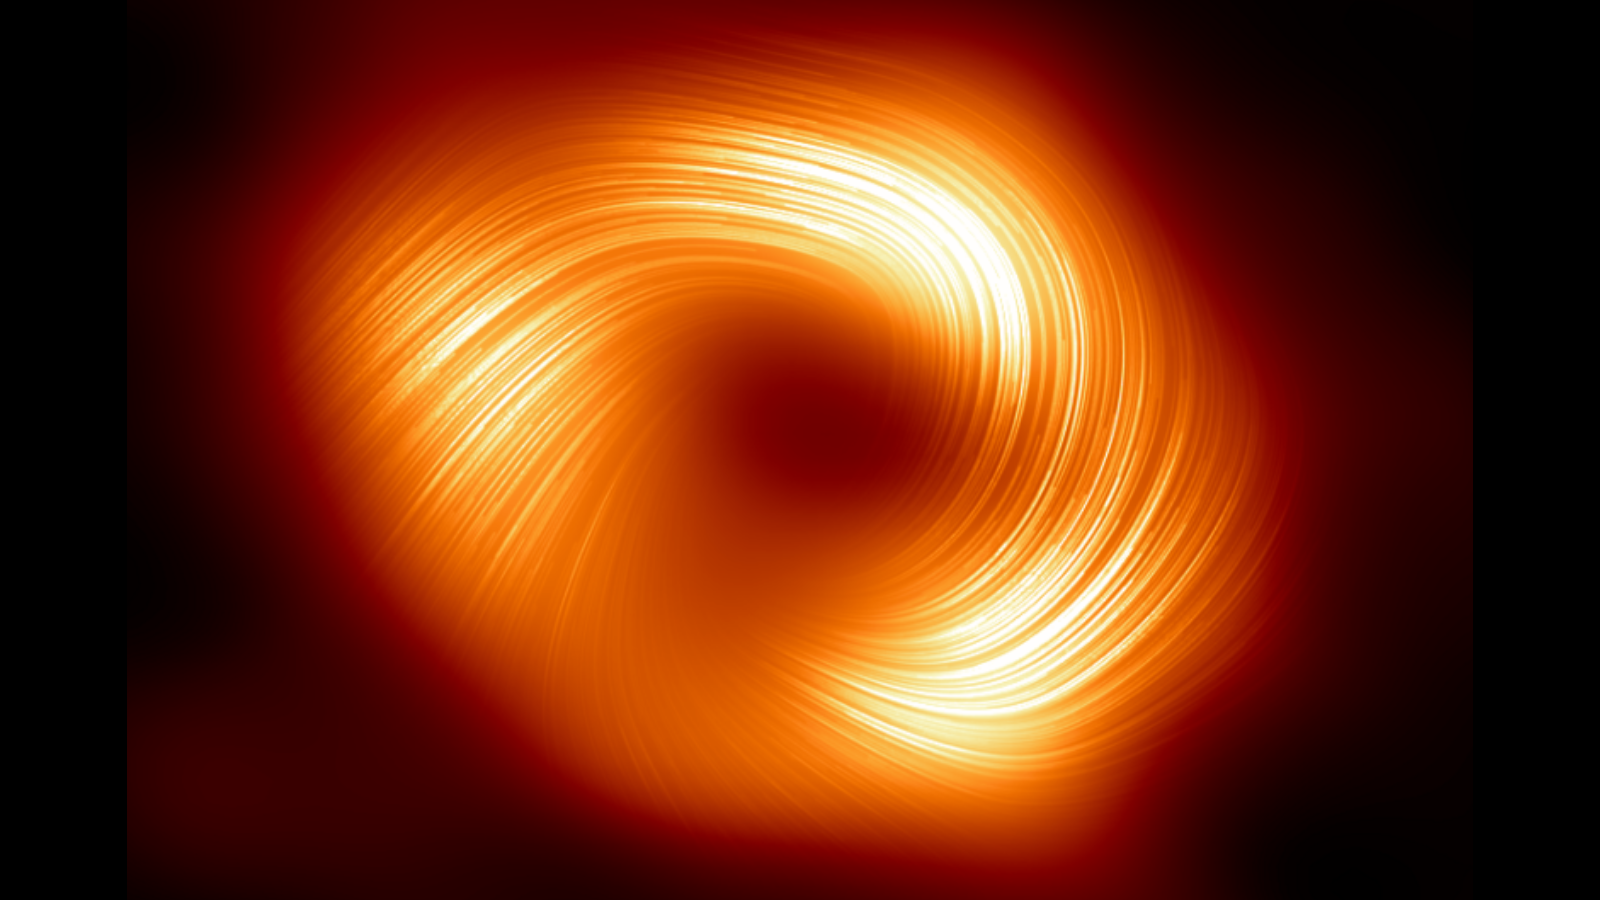 A swirling circle with striations that have a reddish orange glow.